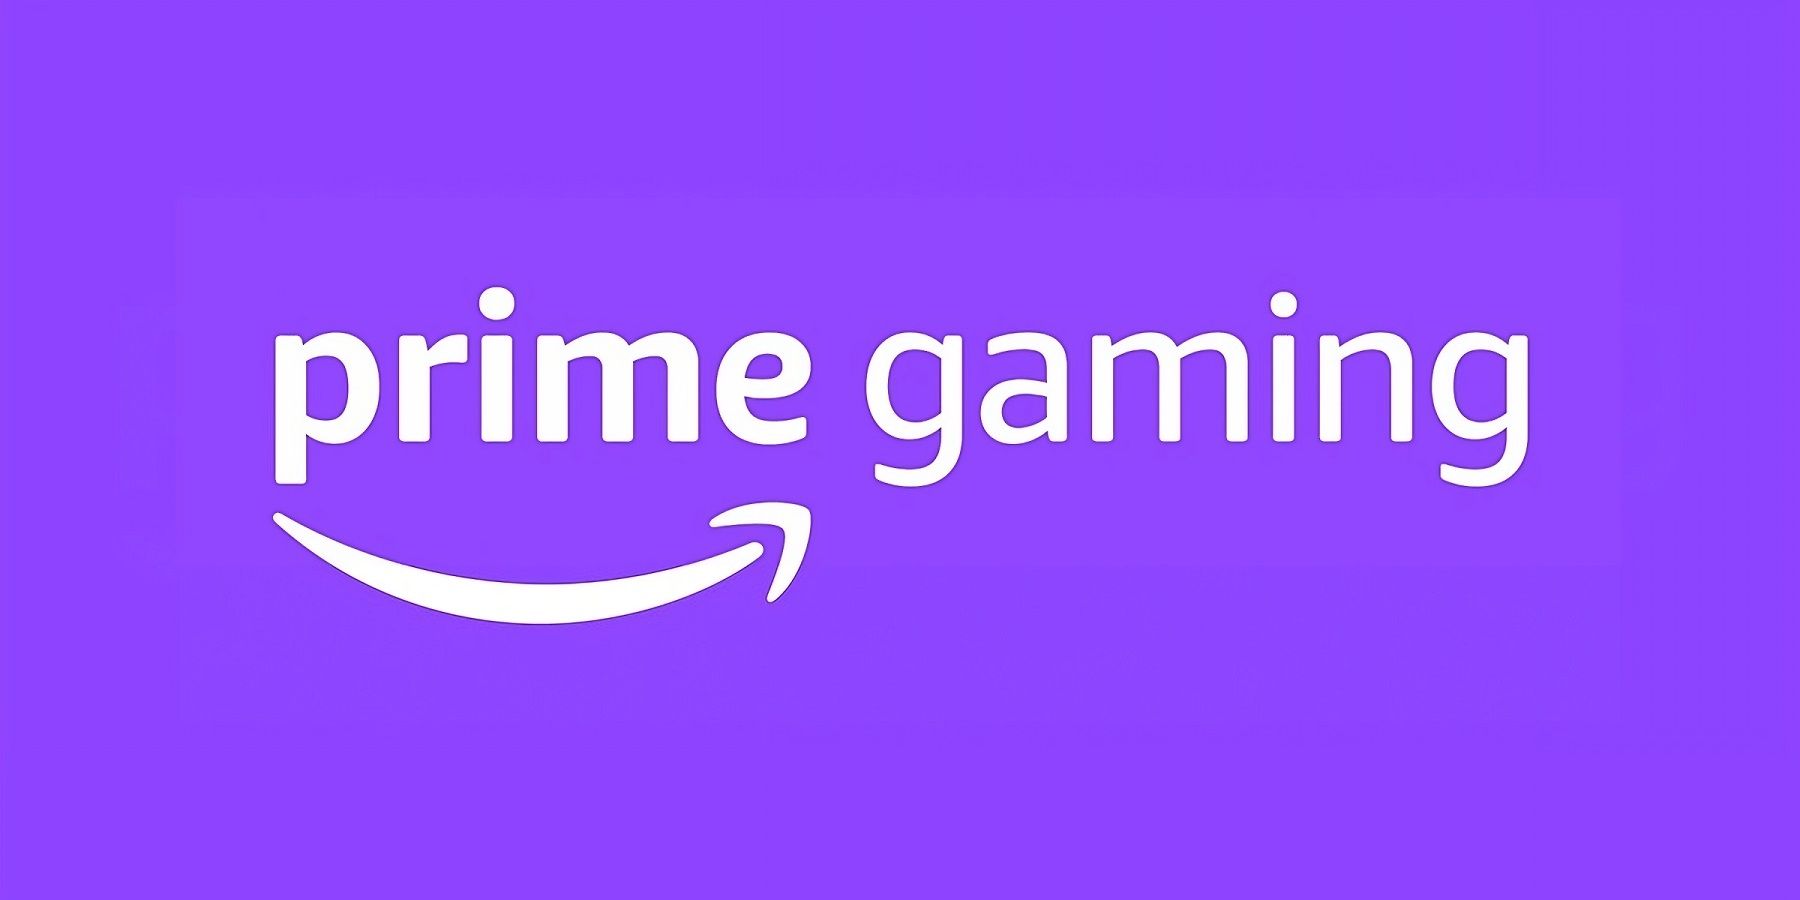 Your Prime Gaming rewards for September include seven free games